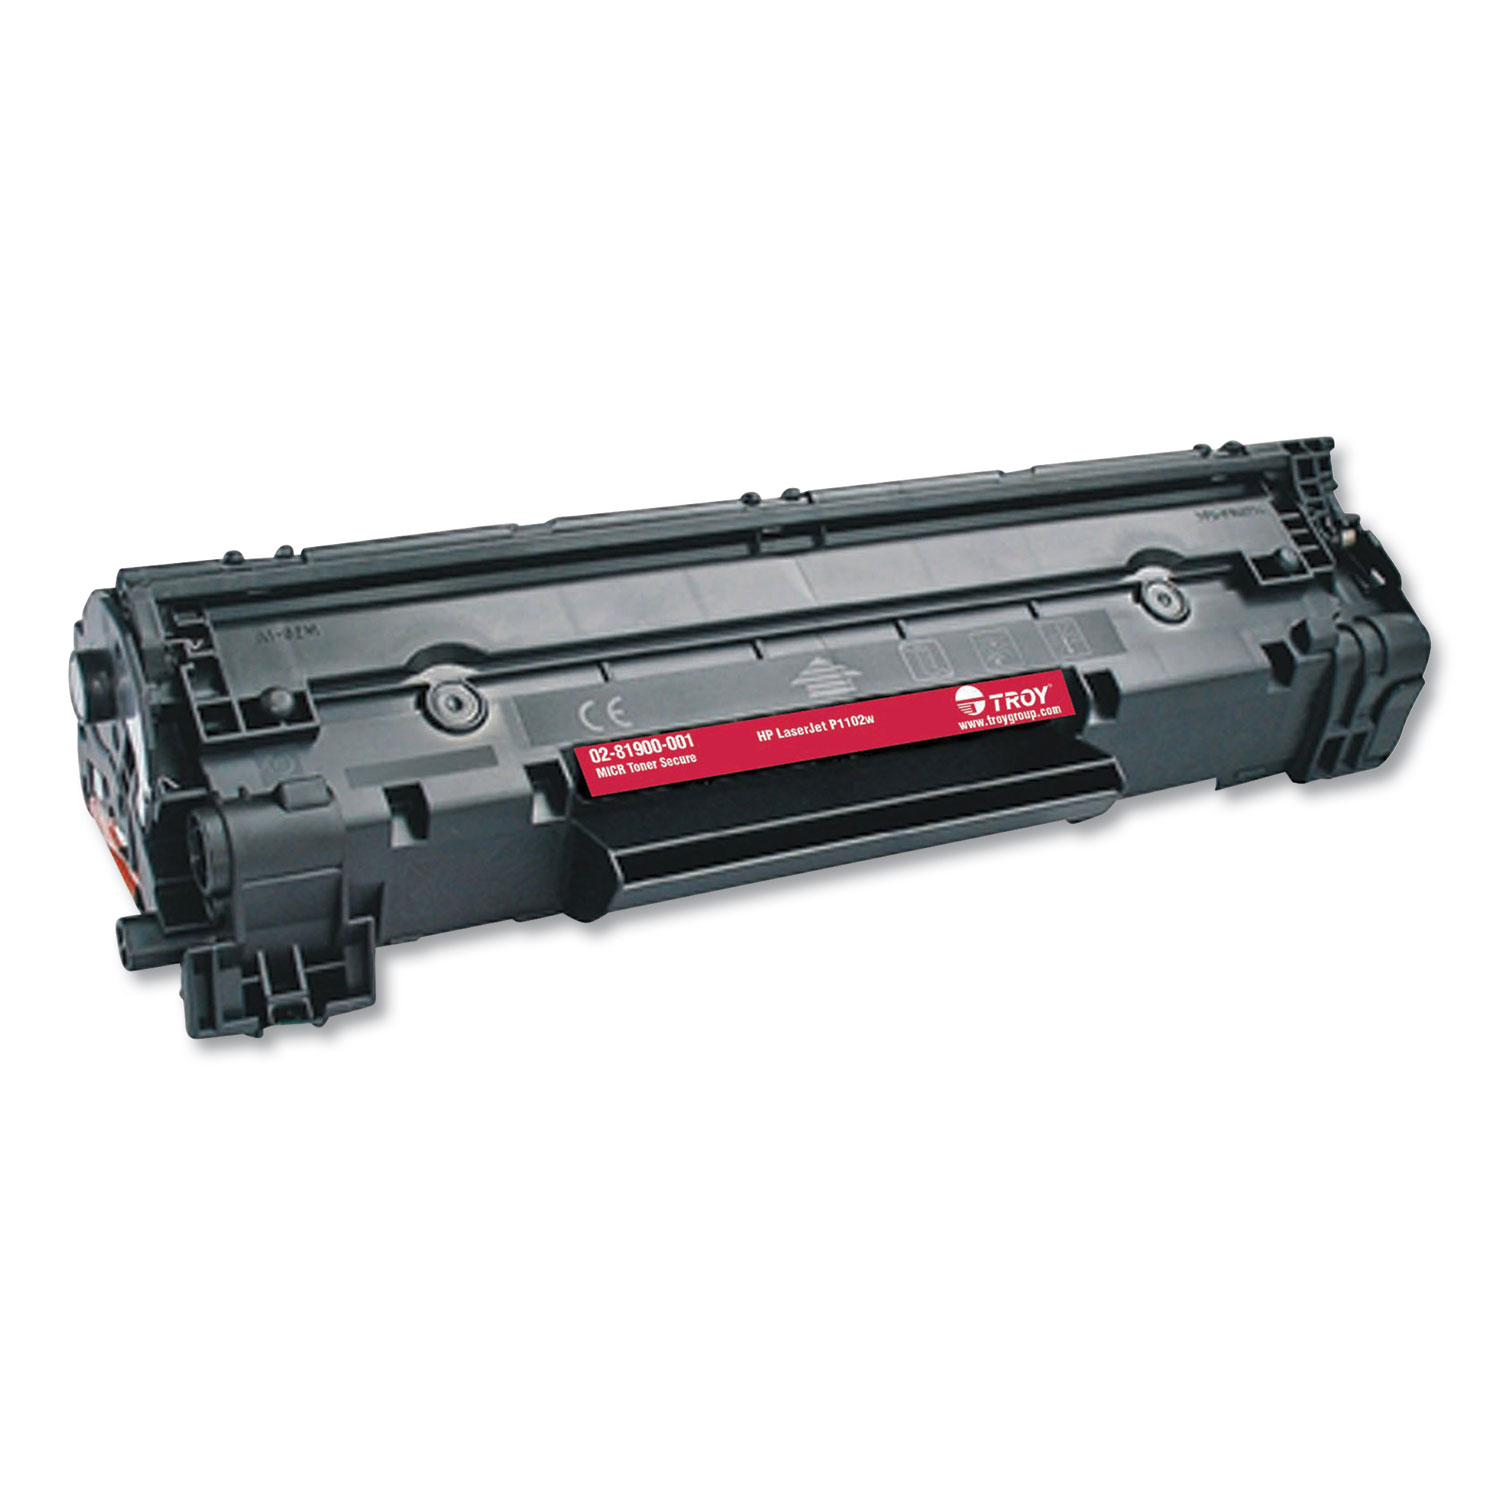  TROY 02-81900-001 0281900001 85A MICR Toner Secure, Alternative for HP CE285A, Black (TRS0281900001) 